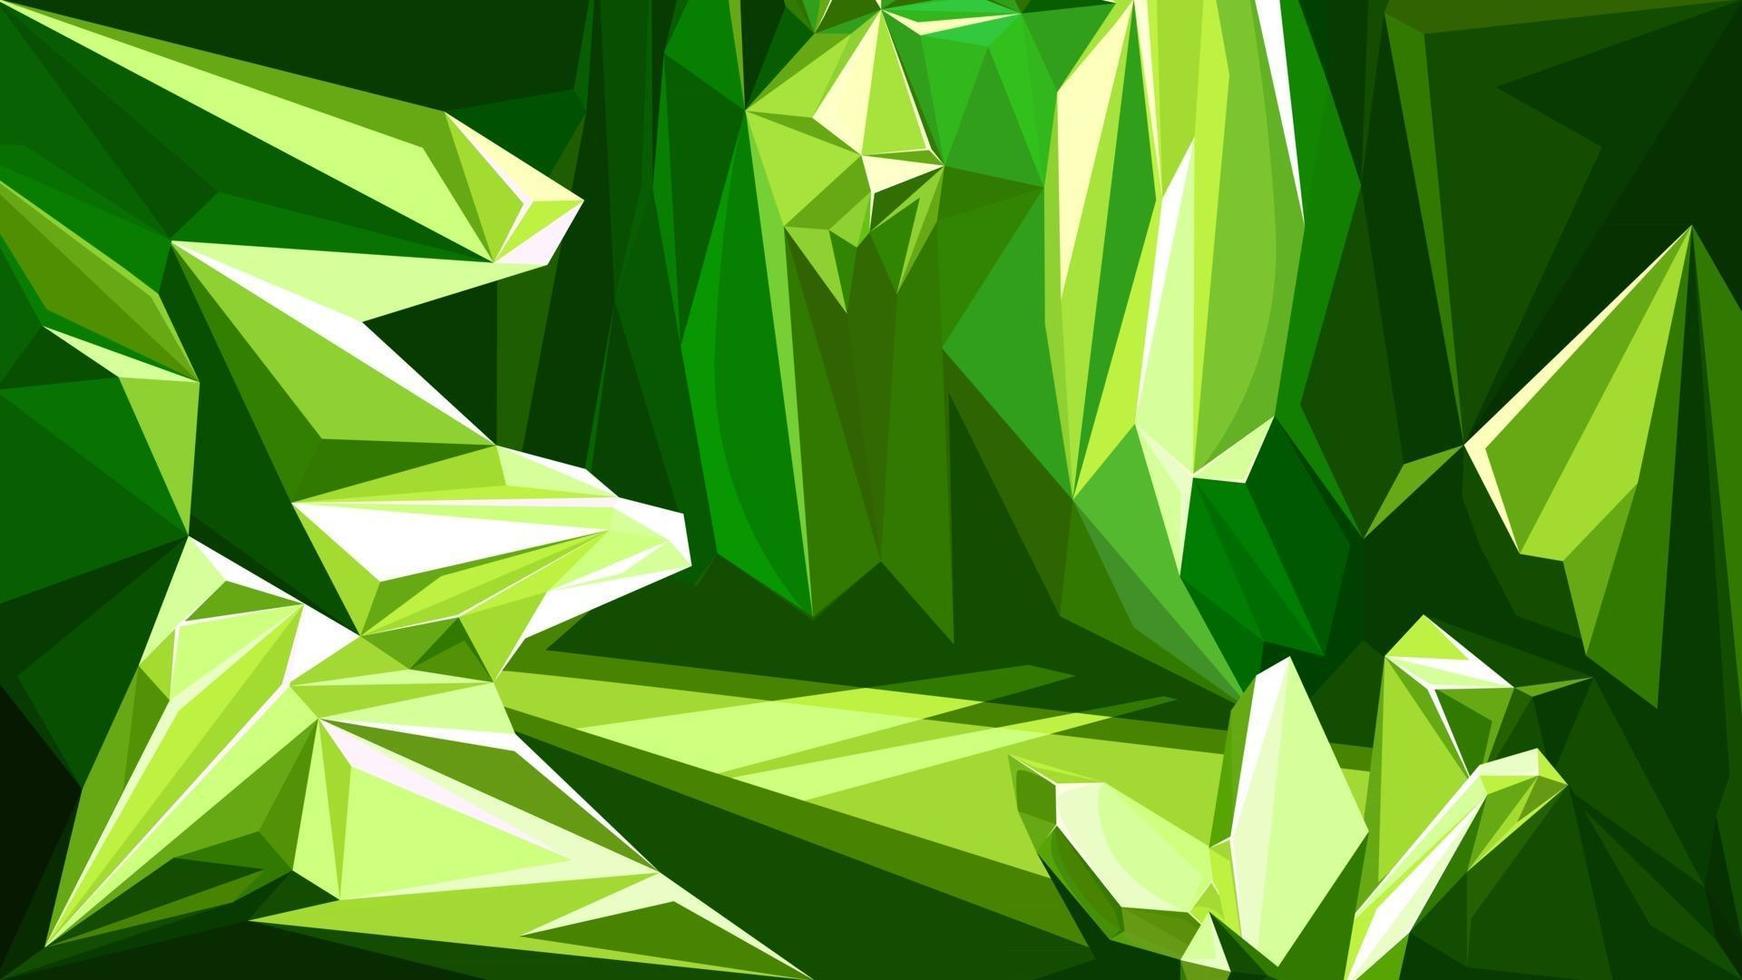 Cave with emeralds vector